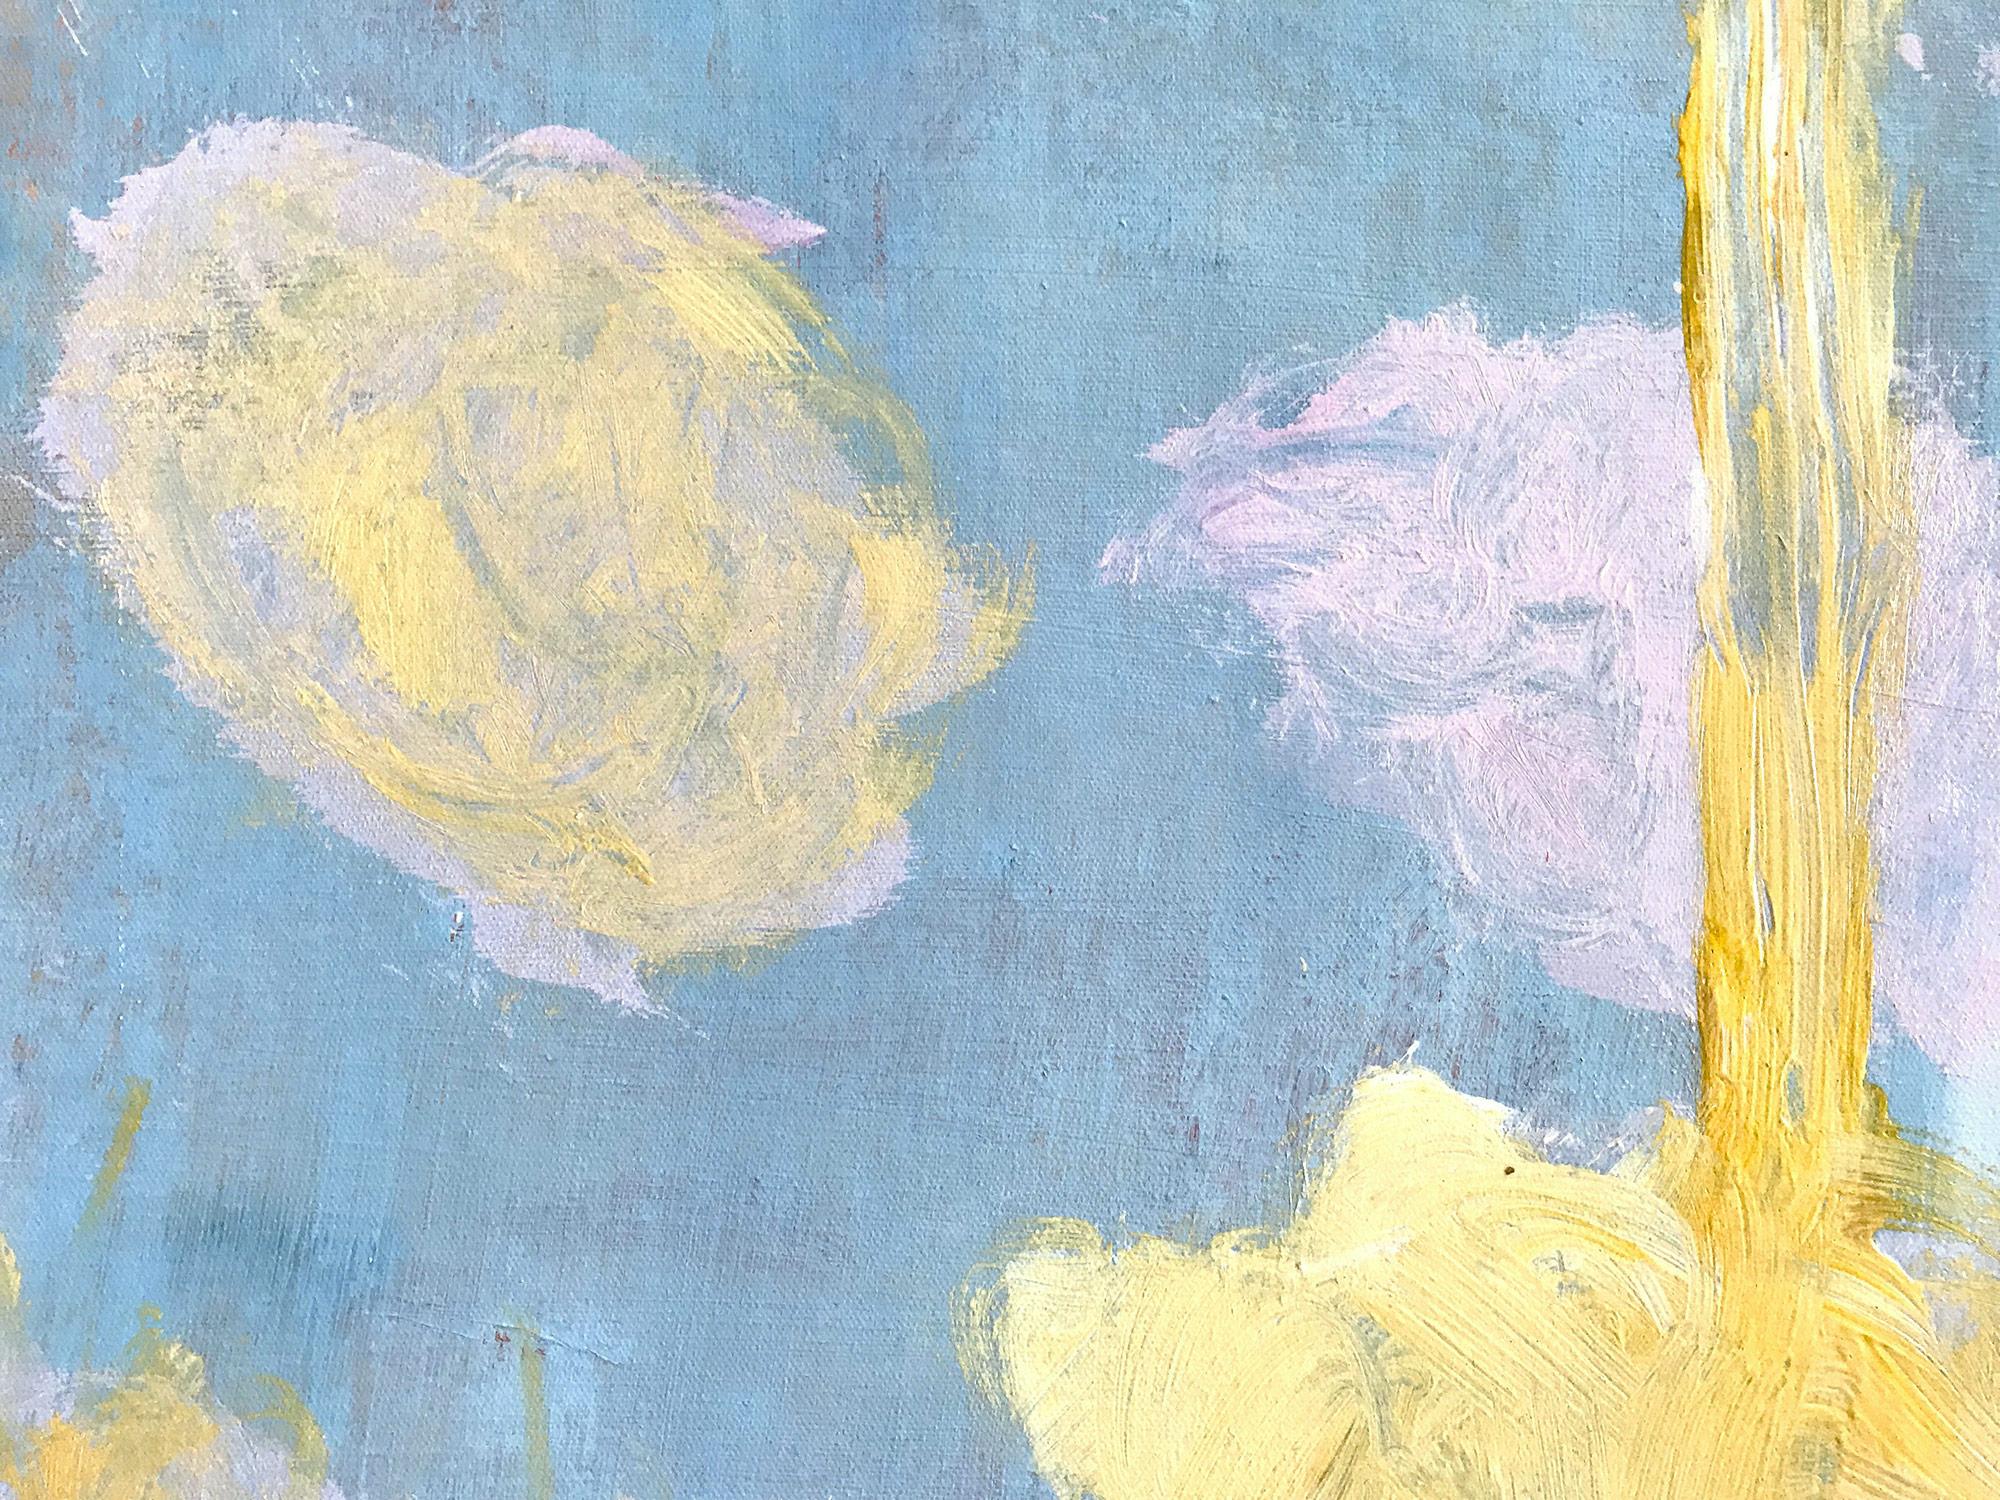 Advent in Yellow, Pink and Blue - Painting by Robert Gregory Phillips